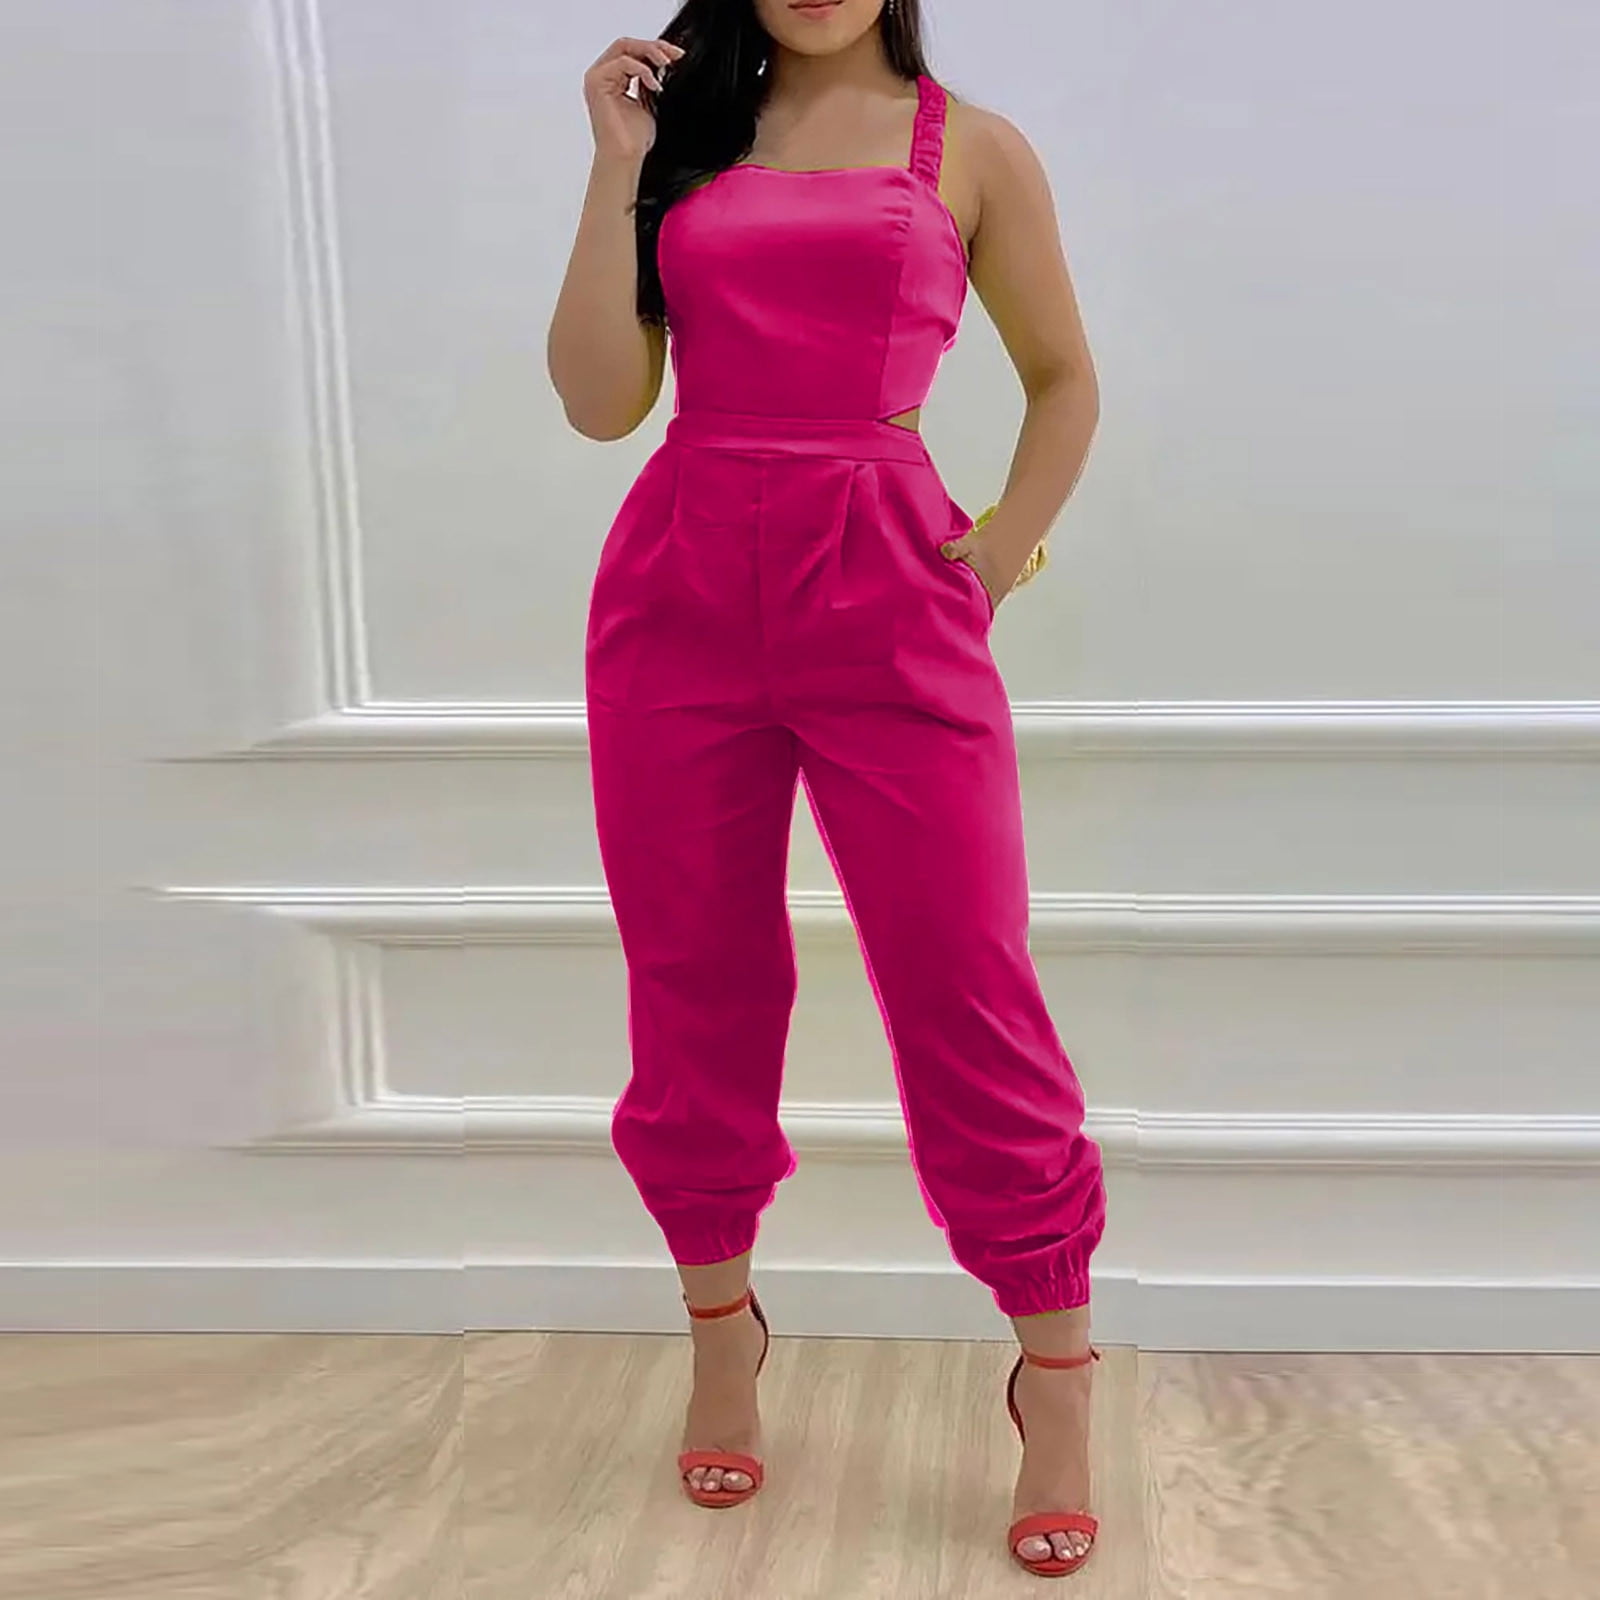 Tawop Women'S Jumpsuits Women'S Overalls With Suspenders And Printing  Casual Jumpsuit Pink Jumpsuit